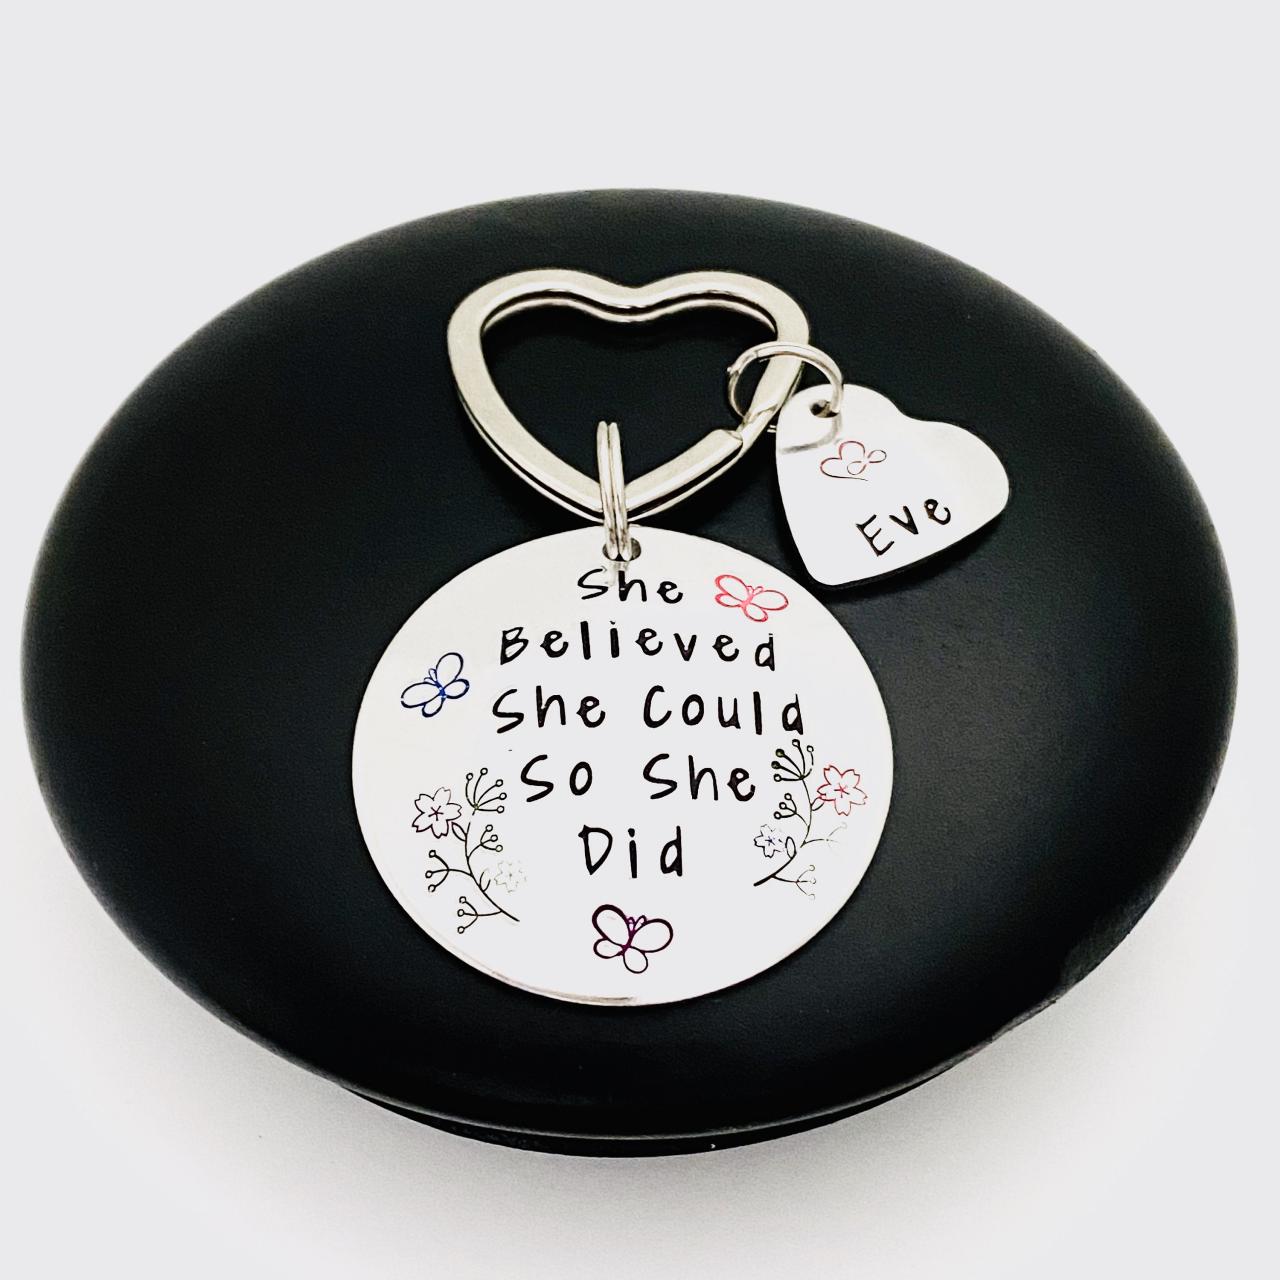 She Believed She Could So She Did Keyring Keychain, Personalised Motivational Keyring, Friendship Gift, Graduation Gift, Gift For Daughter..